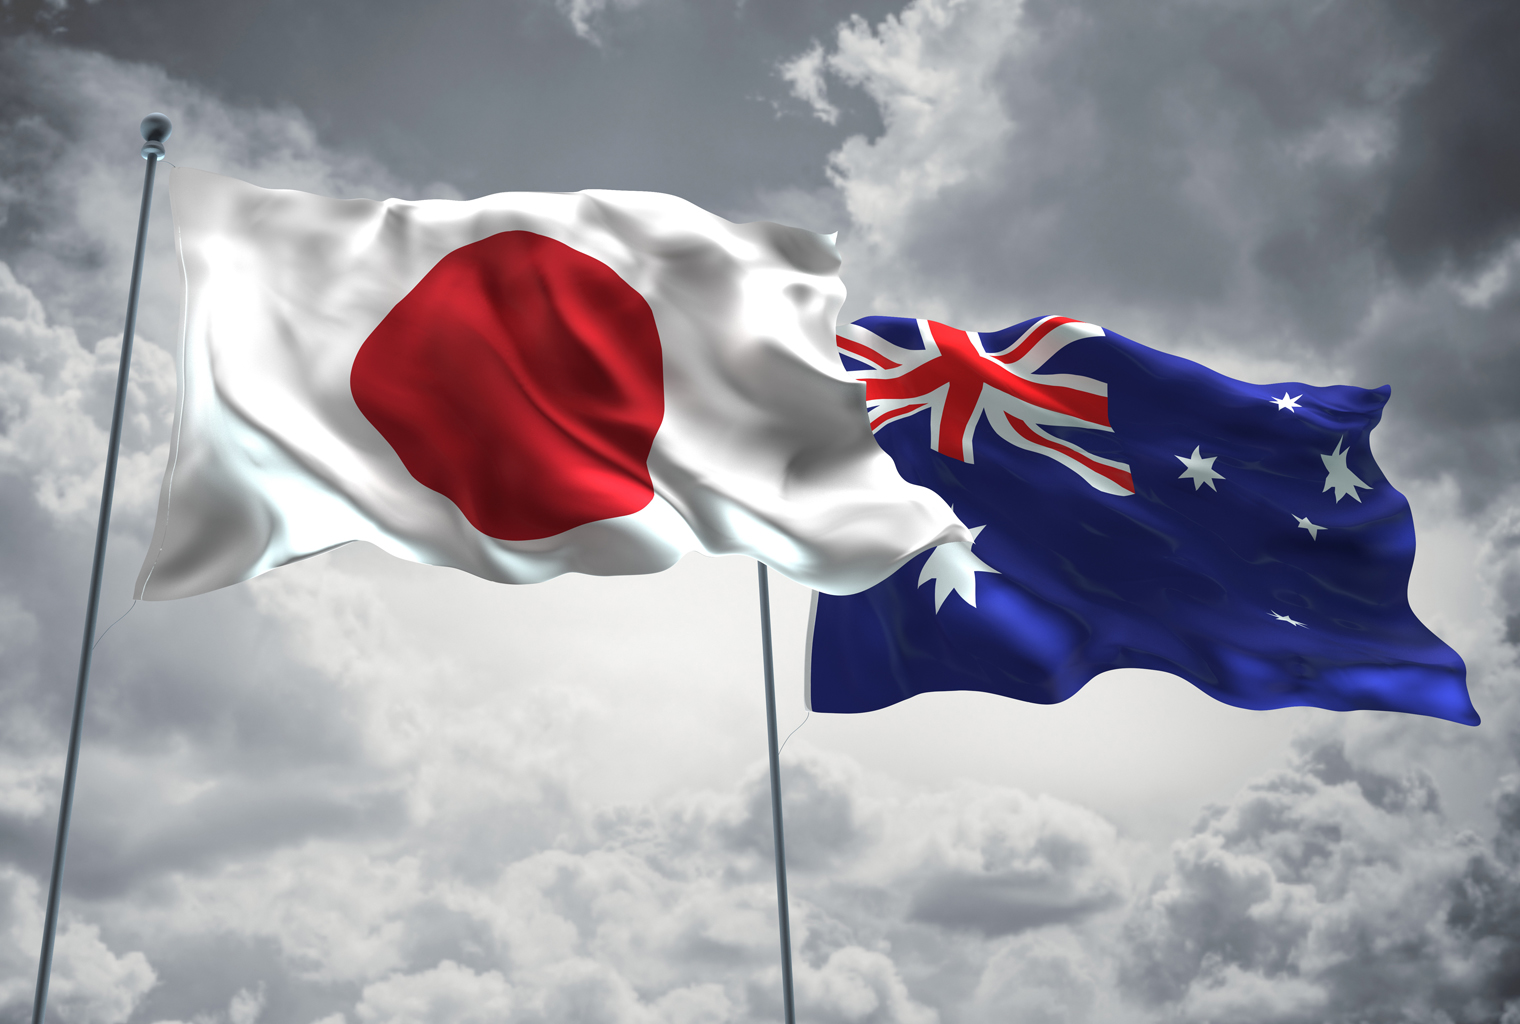 Bitcoin Cash Adoption Continues to Spread in North Queensland and Japan